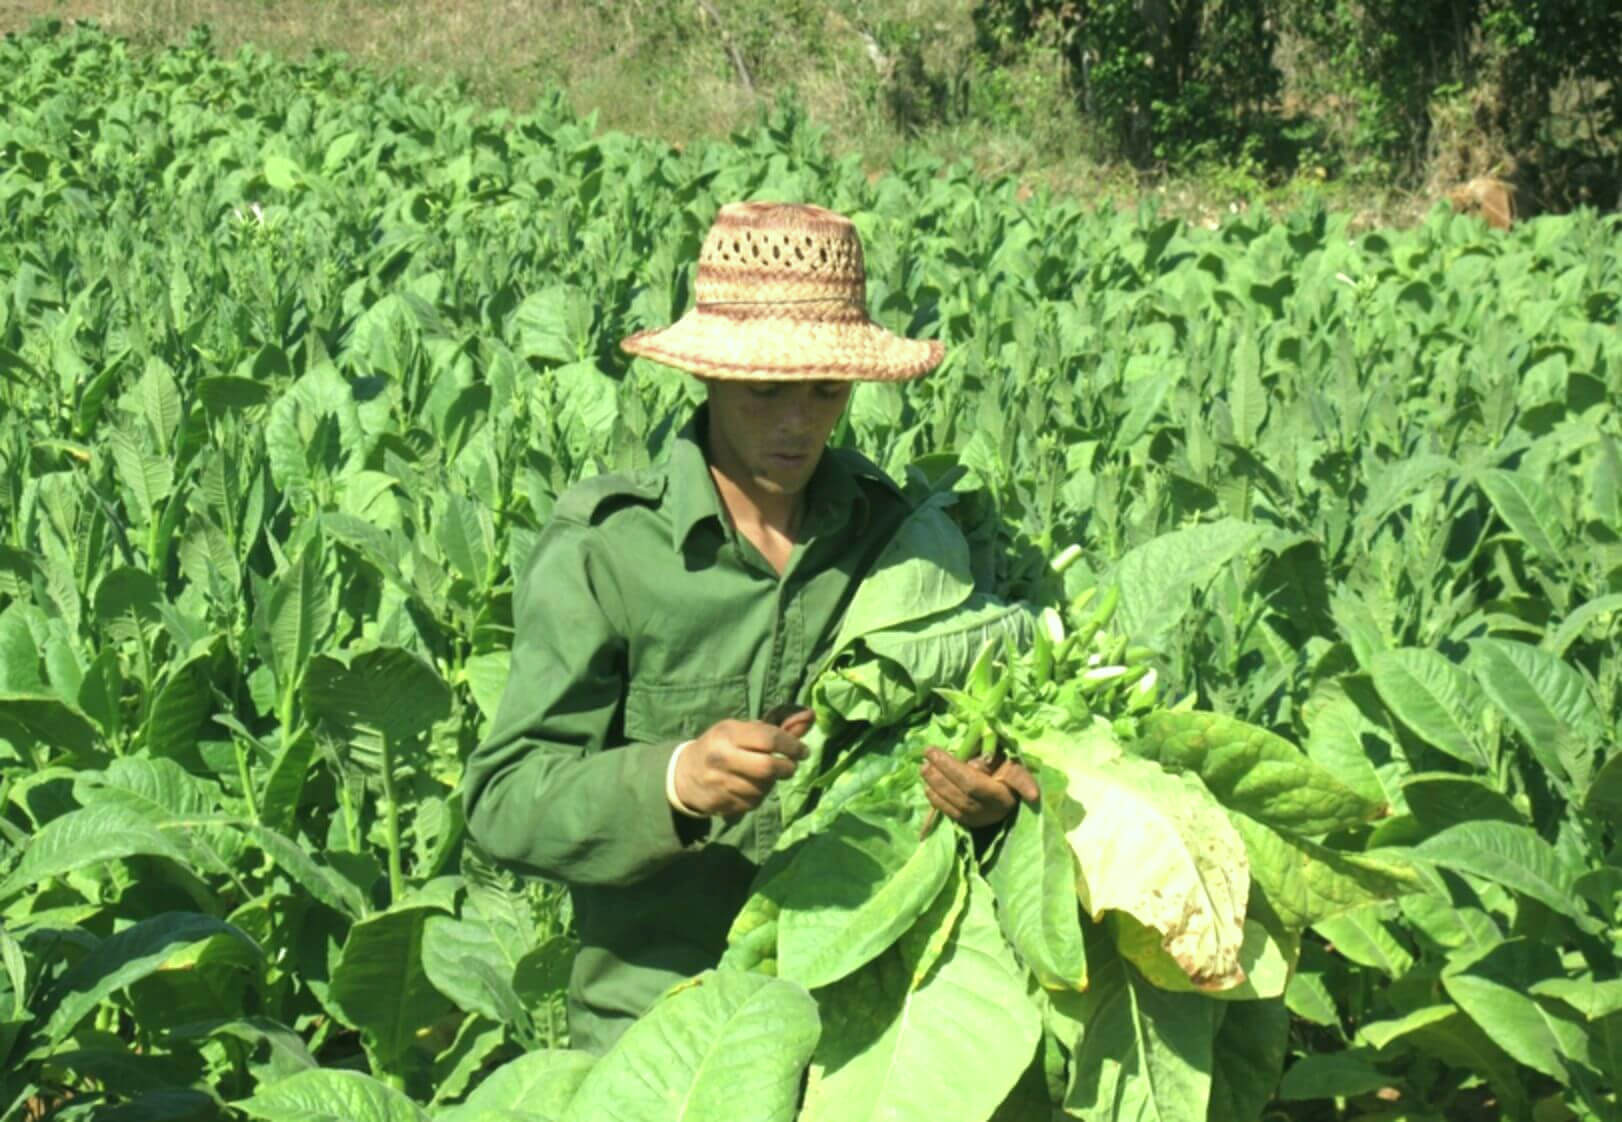 Delve into the Verdant Tobacco Fields of the Bahamas